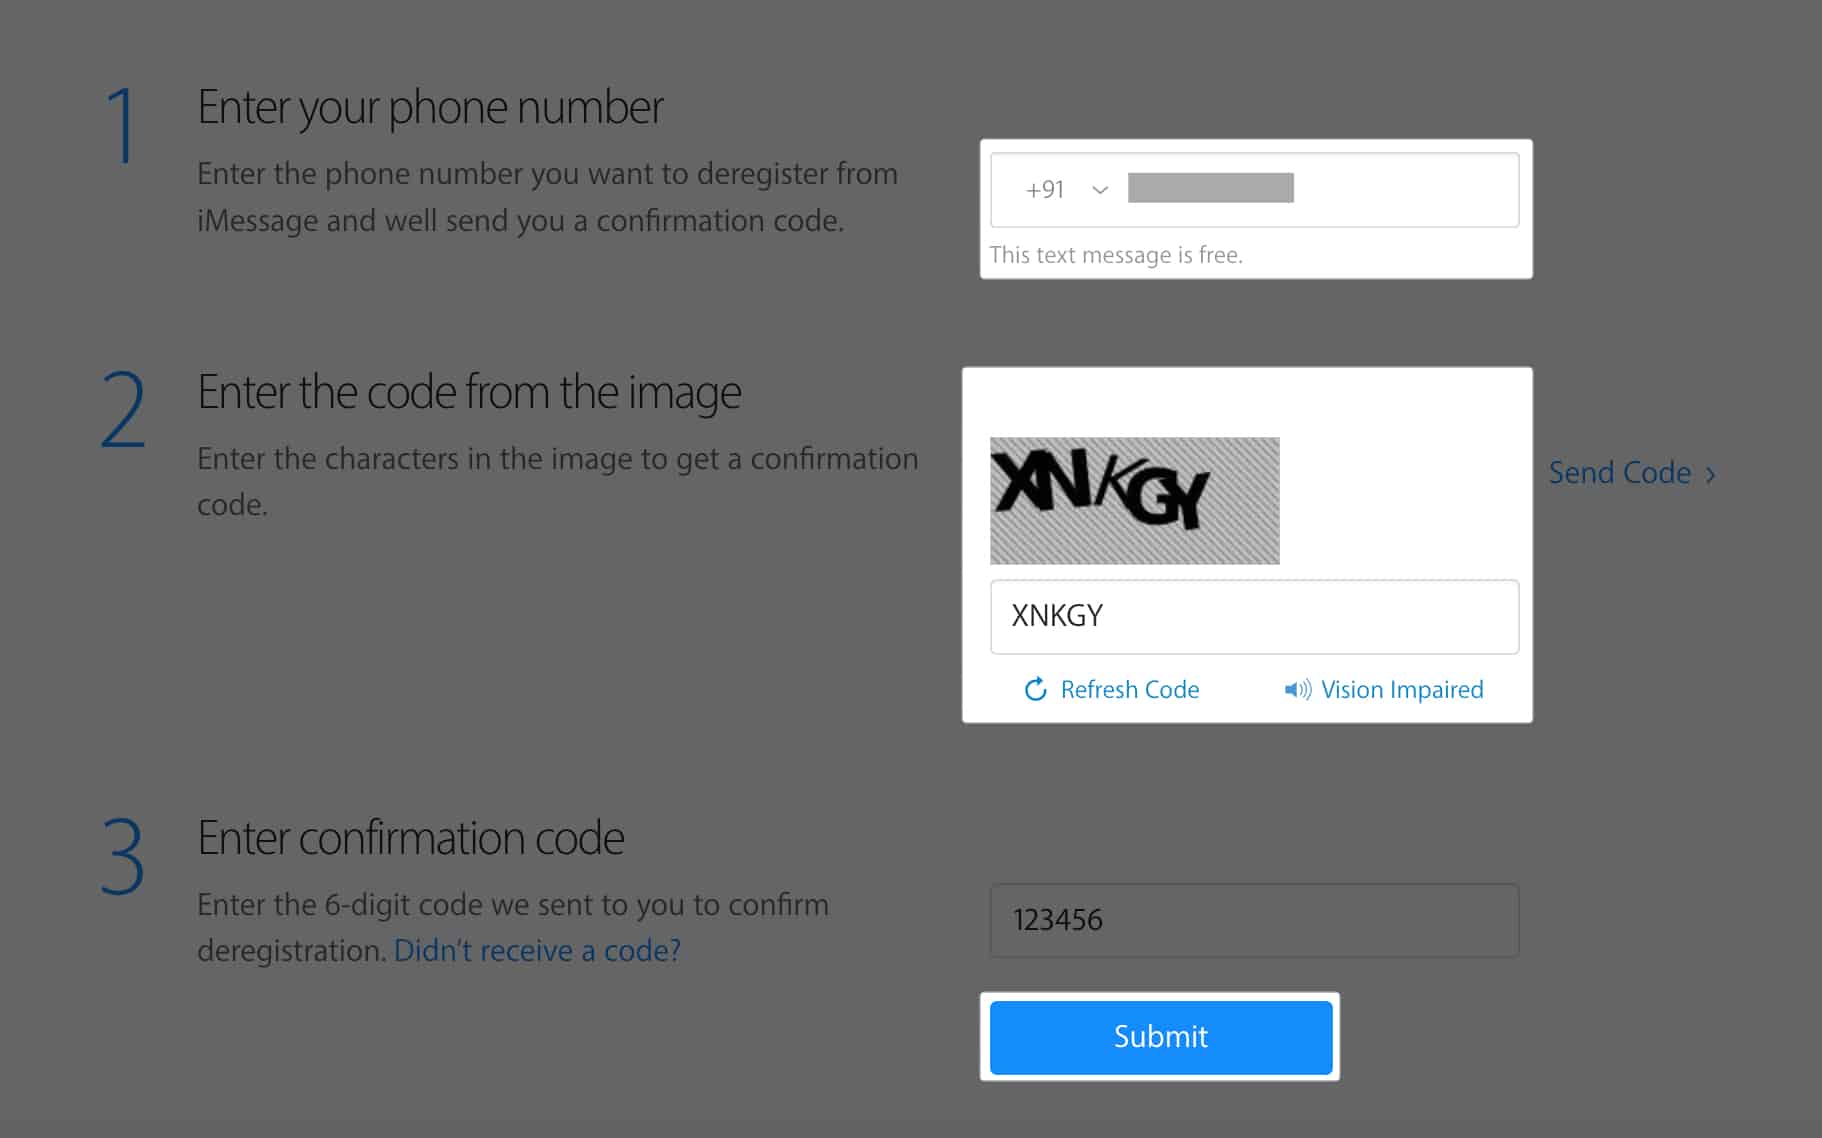 Deregister your number from iMessage without accessing your iPhone